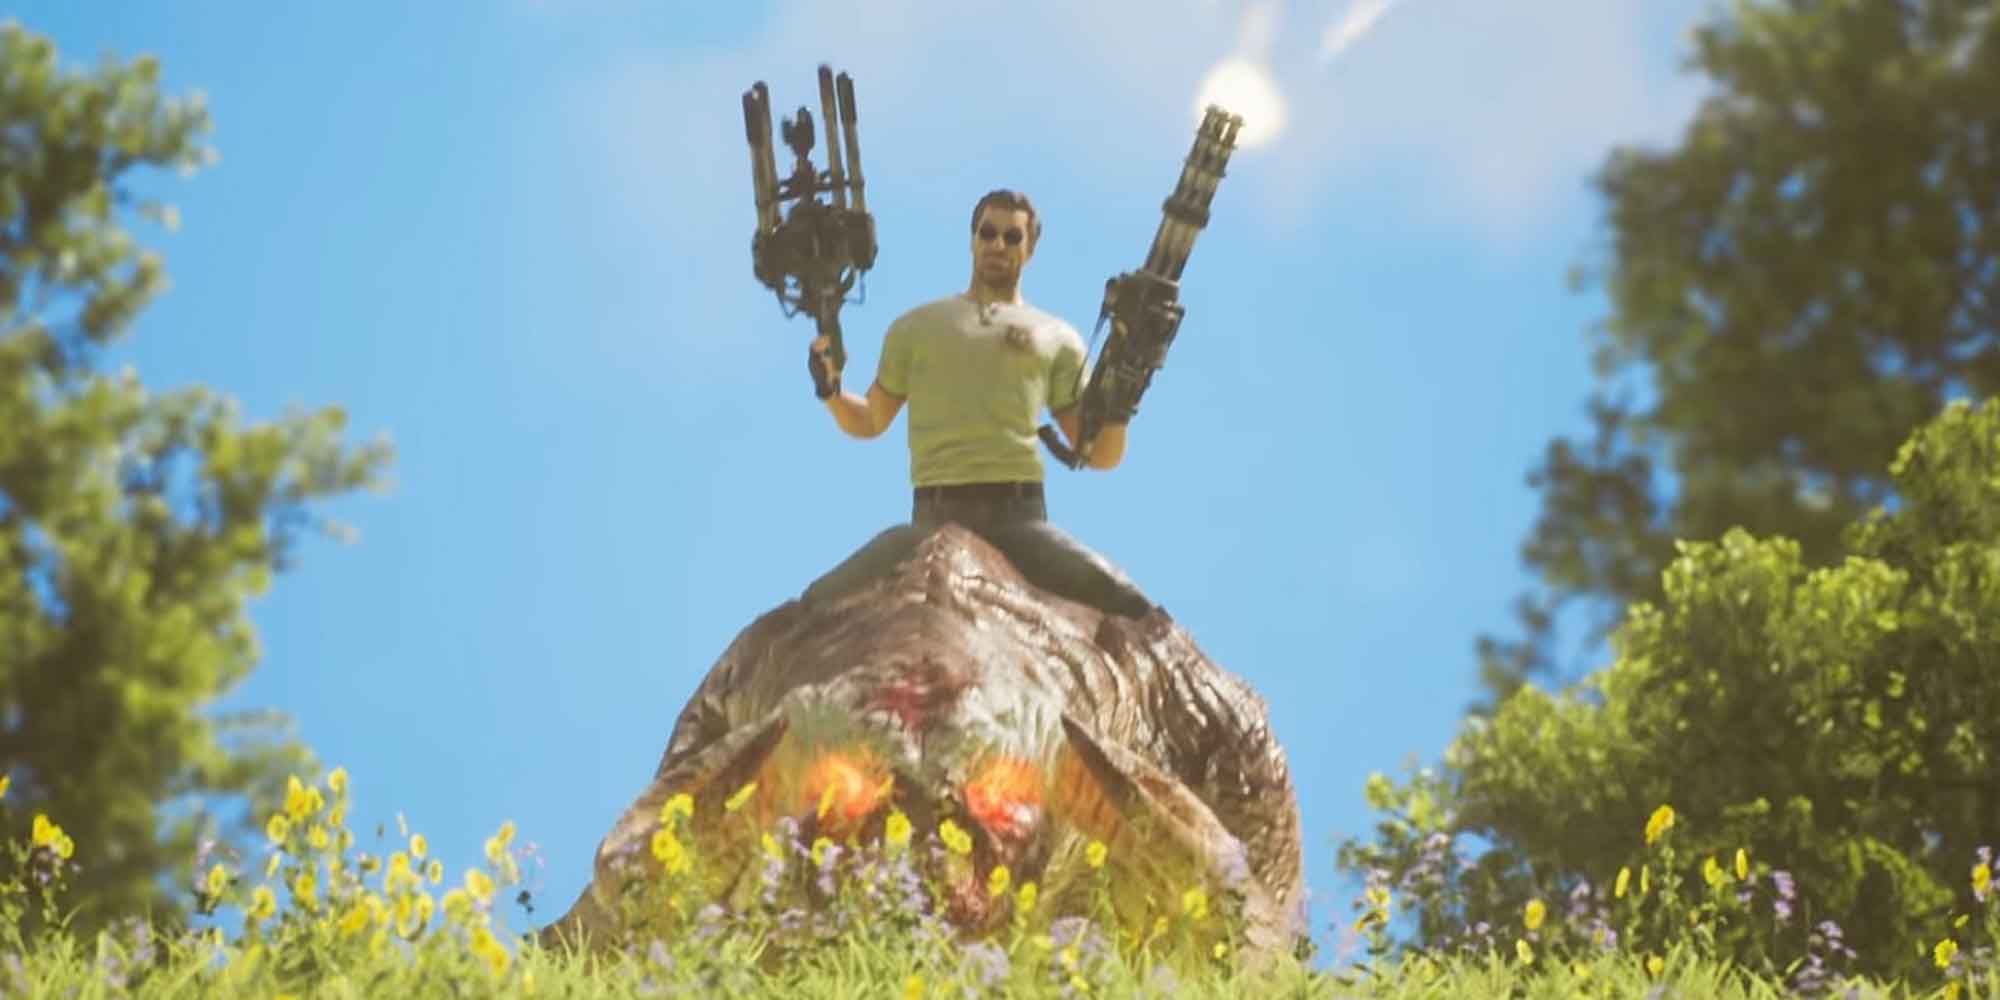 Using the Rodeo Time skill to ride an enemy creature in Serious Sam 4